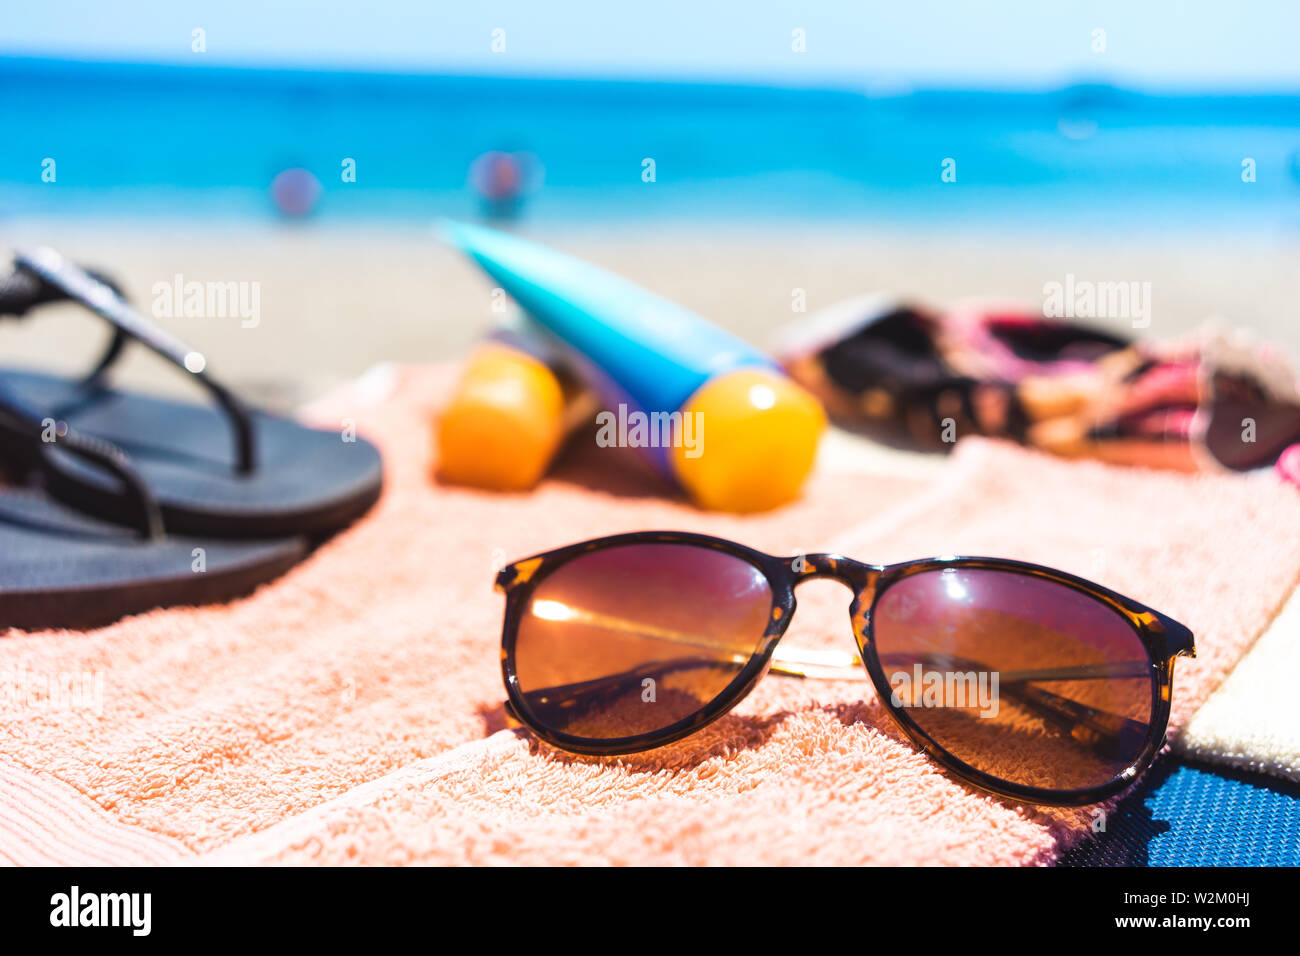 summer vacation: towel with different beach accessories like sunglasses, suncream and flip flops at the ocean Stock Photo